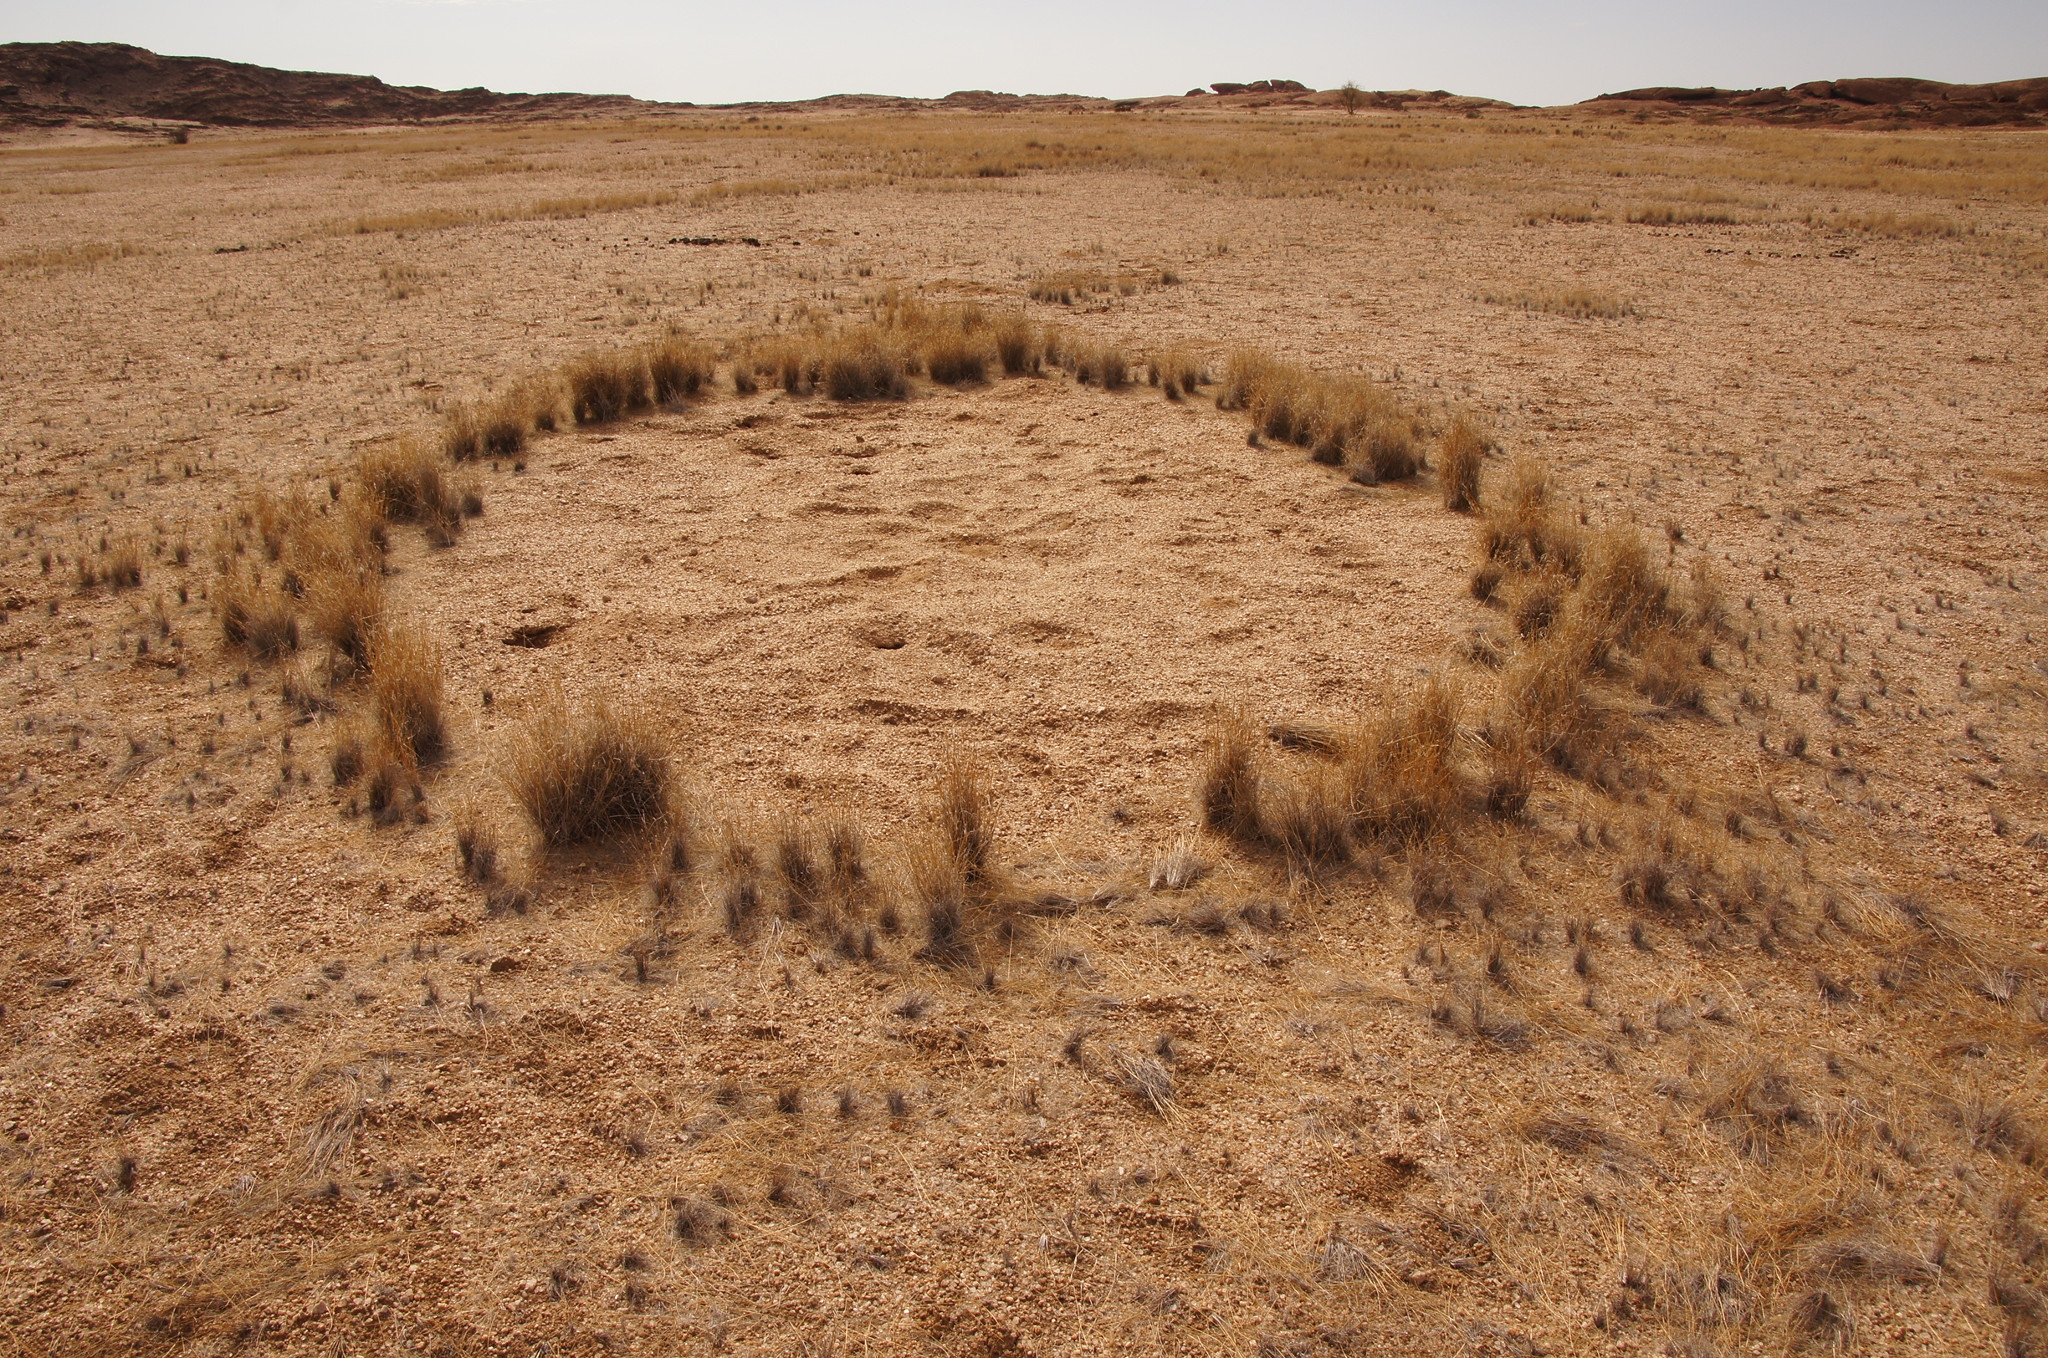 Mysterious fairy circles in Namibian desert explained at last